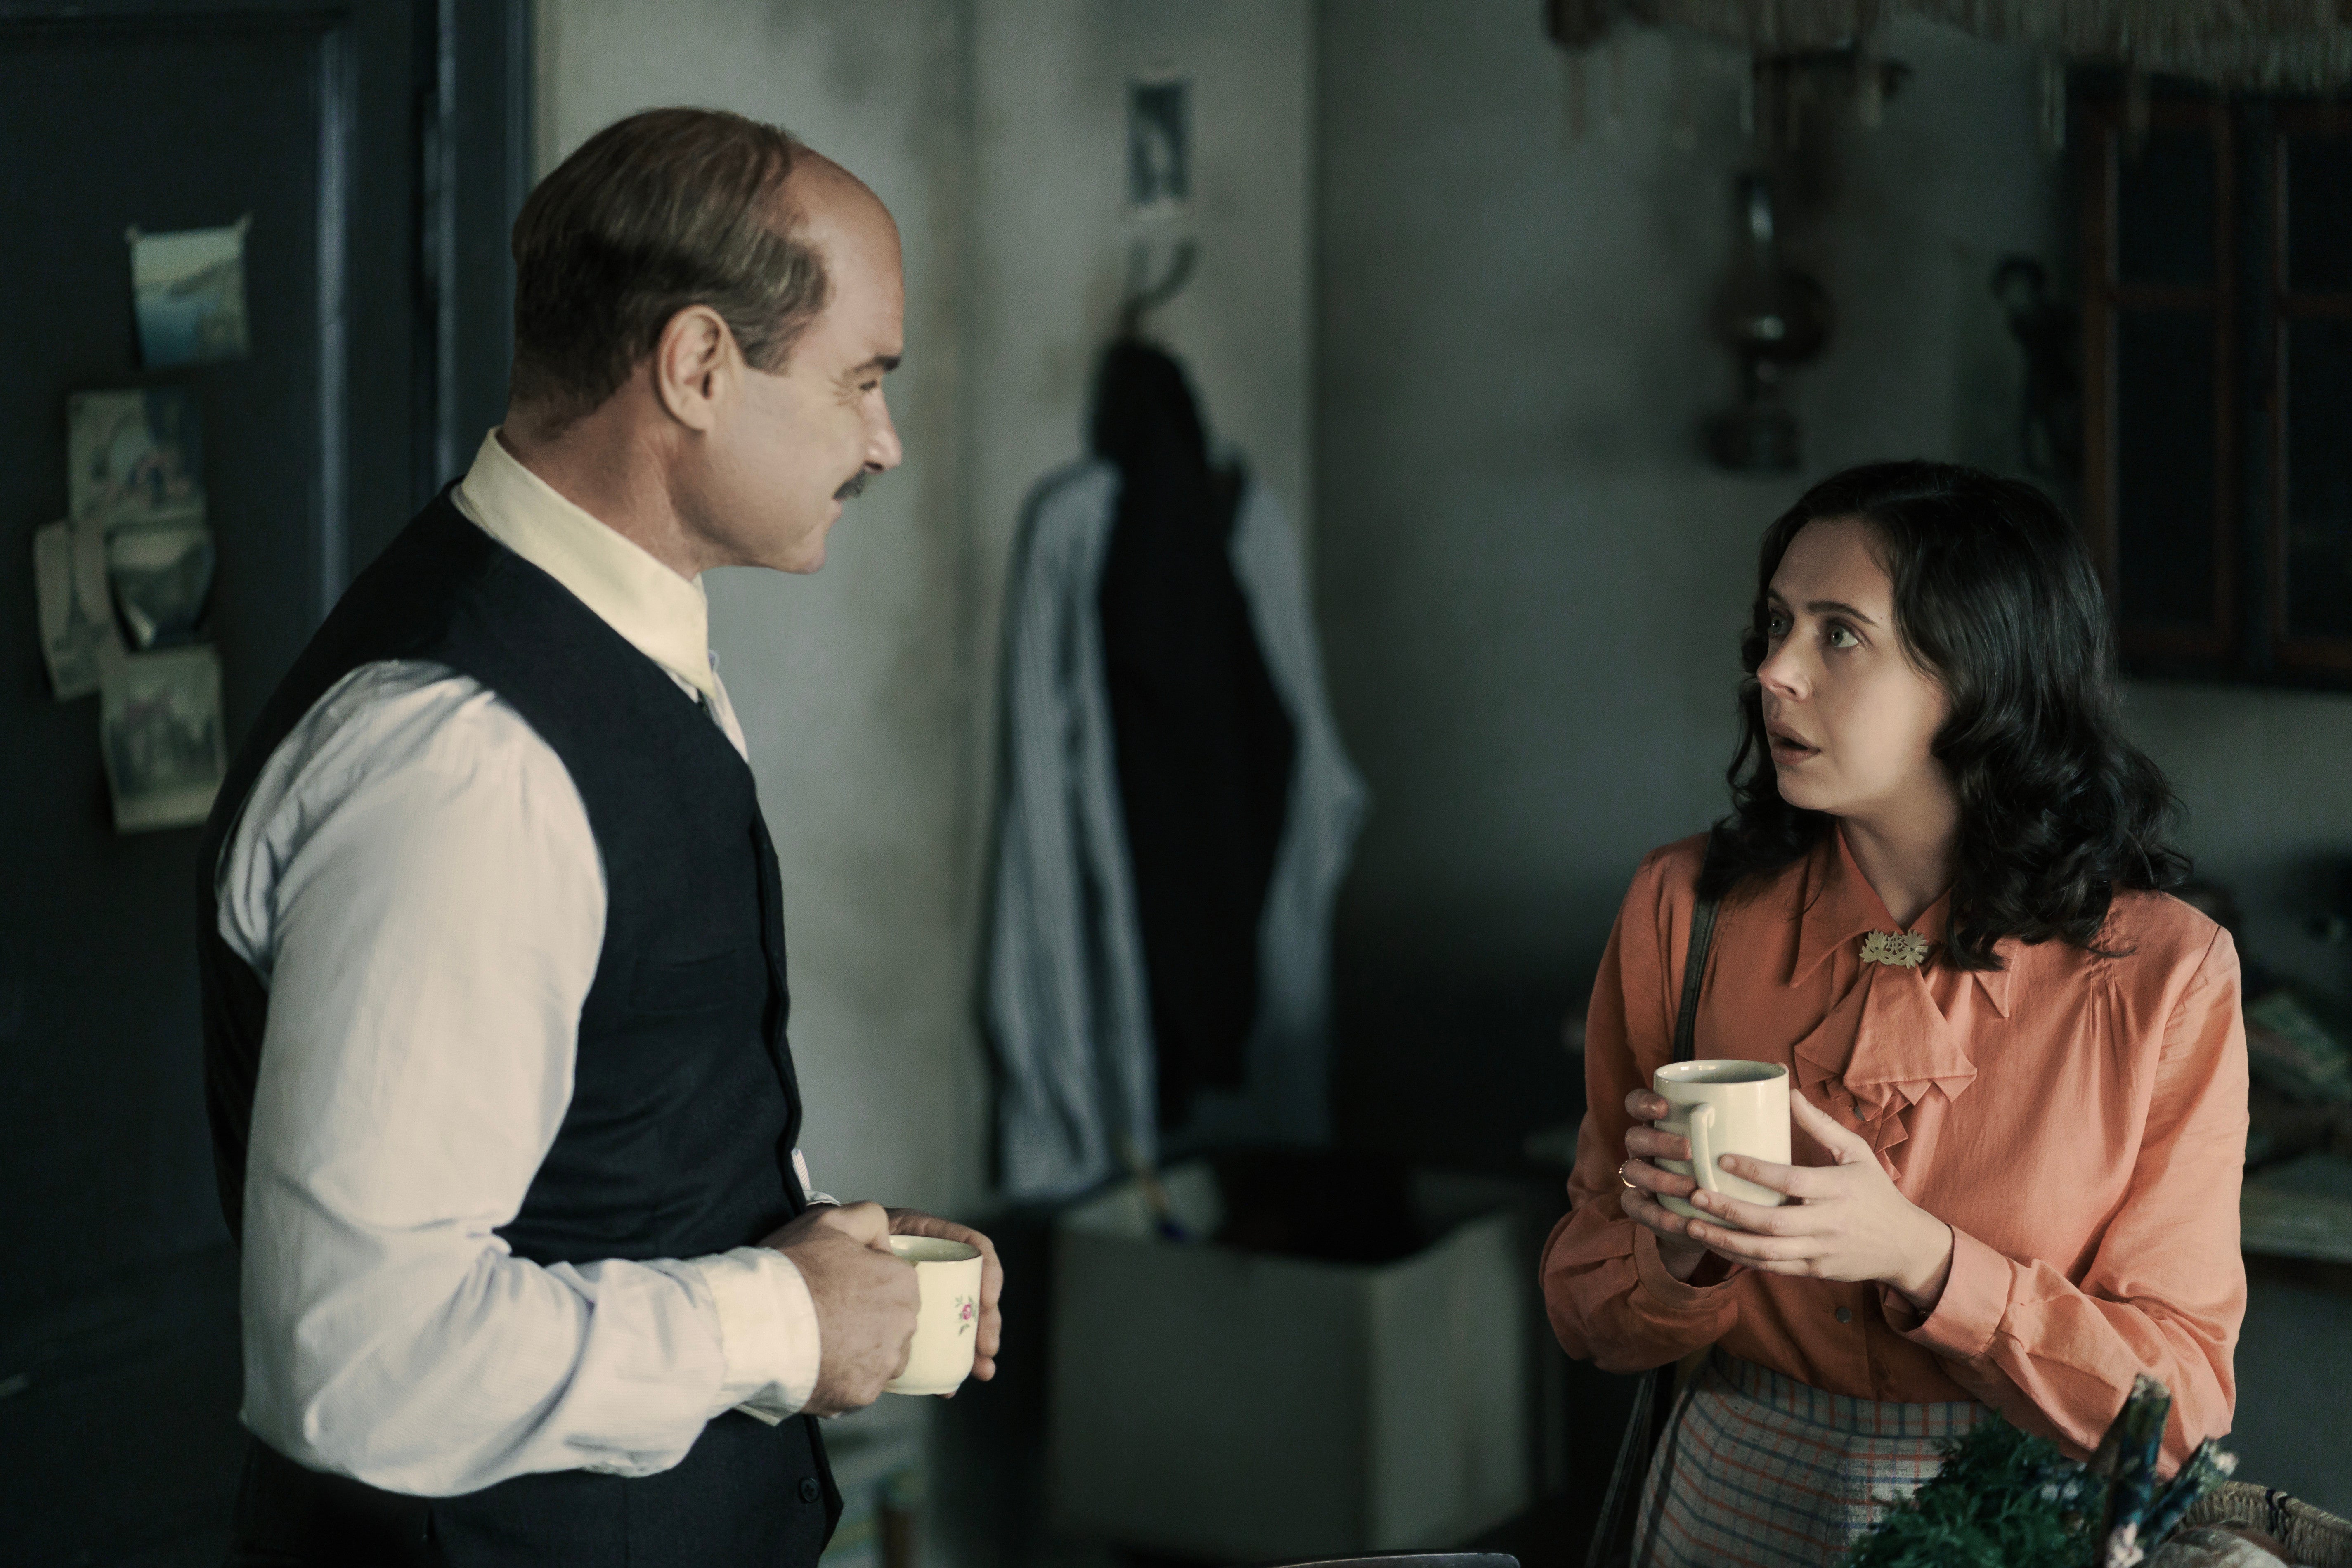 Liev Shreiber, left, plays Otto Frank, in new series A Small Light, while Bel Powley, right, plays Miep Gies, who was an employee and friend of the Franks before the war